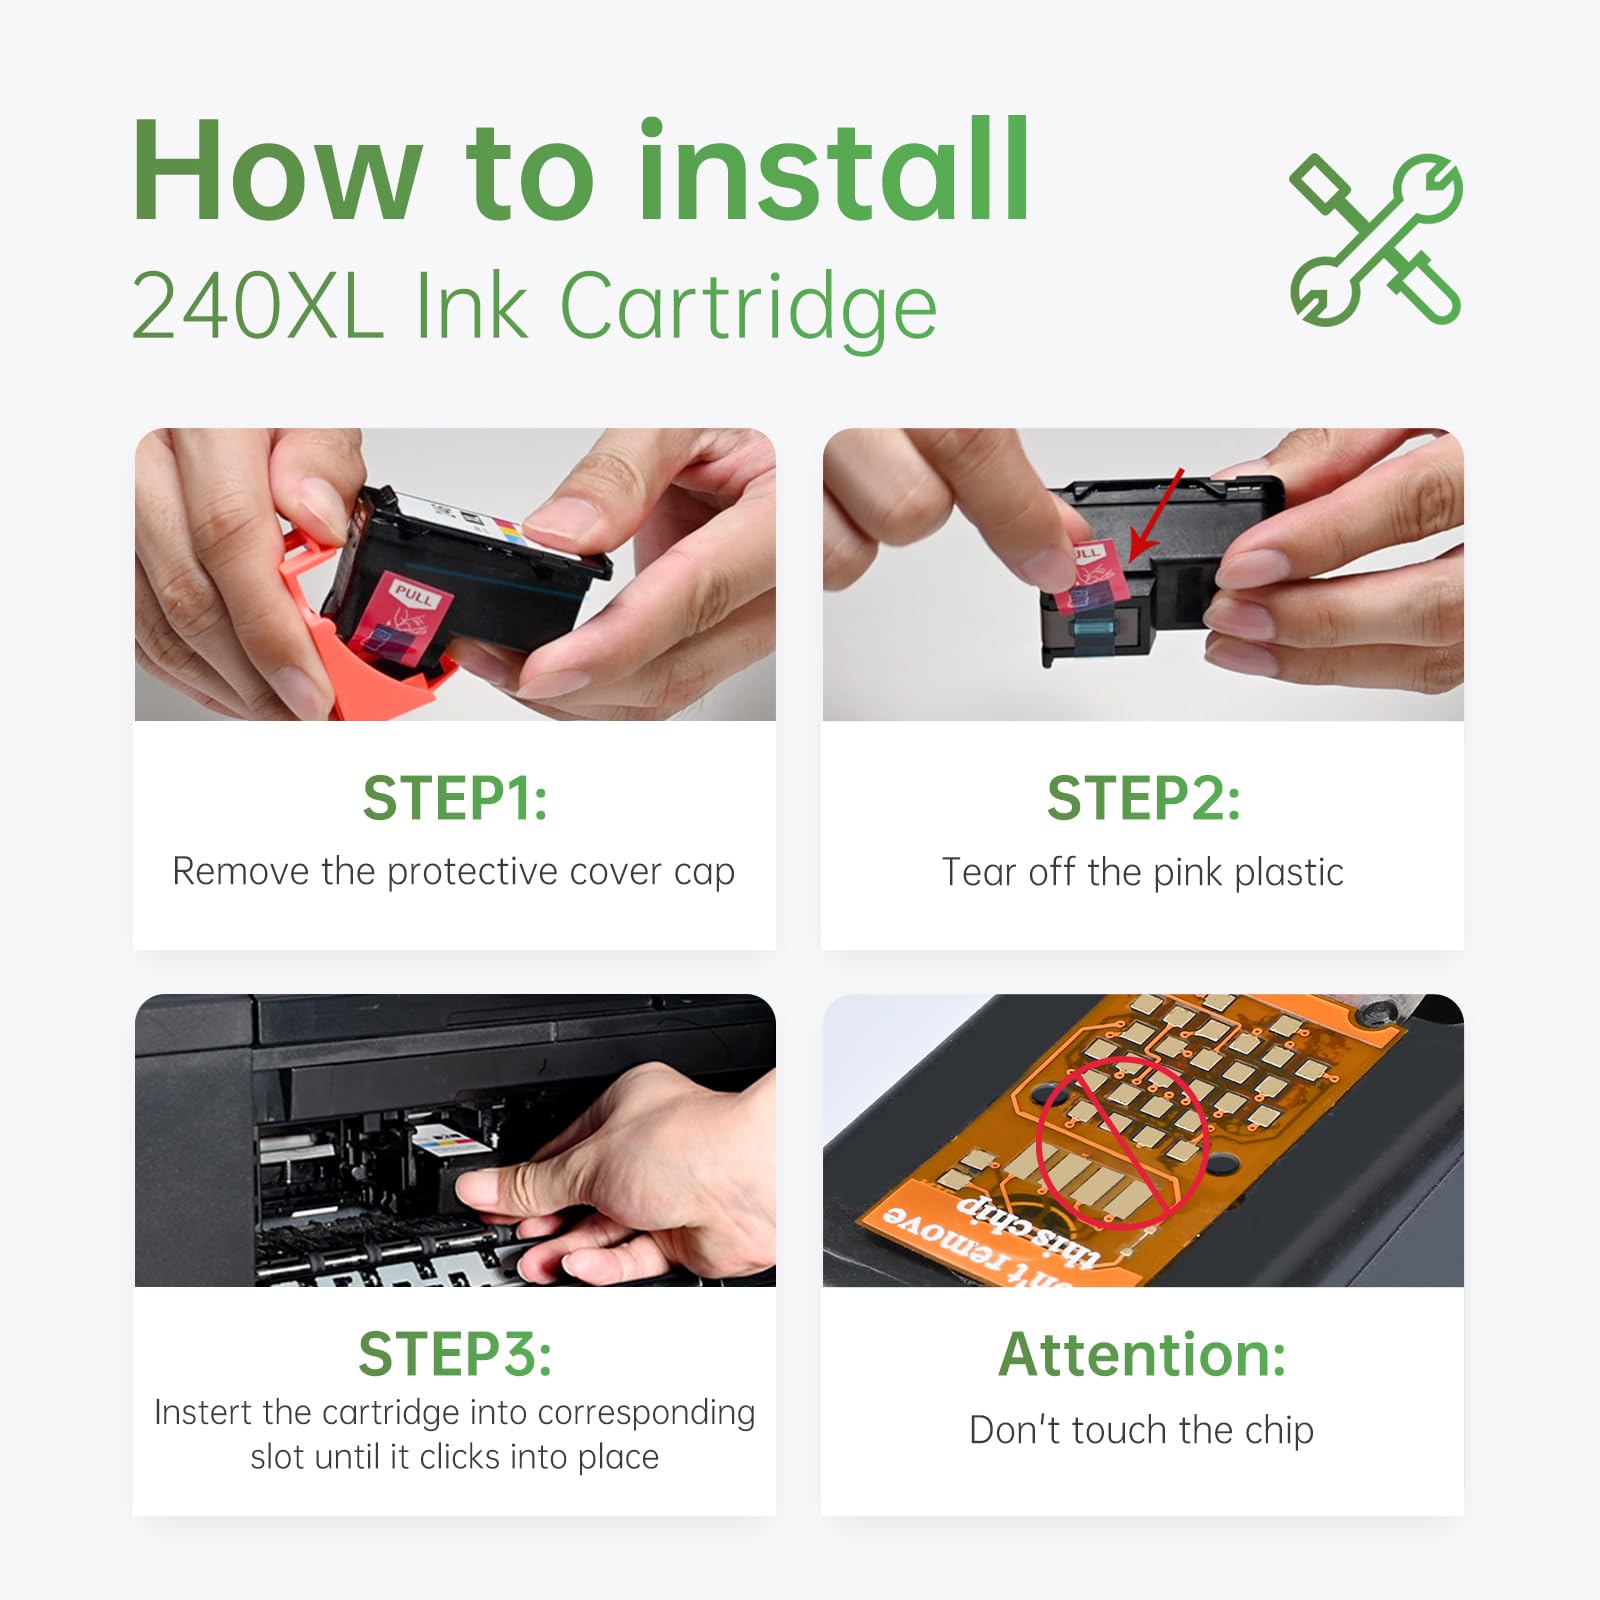 How to Install 240XL Ink Cartridge Instructional Steps: "Step-by-step guide on installing LEMERO 240XL black ink cartridge into a printer, with detailed instructions on removing the protective cover, tearing off plastic, and proper cartridge insertion without touching the chip."